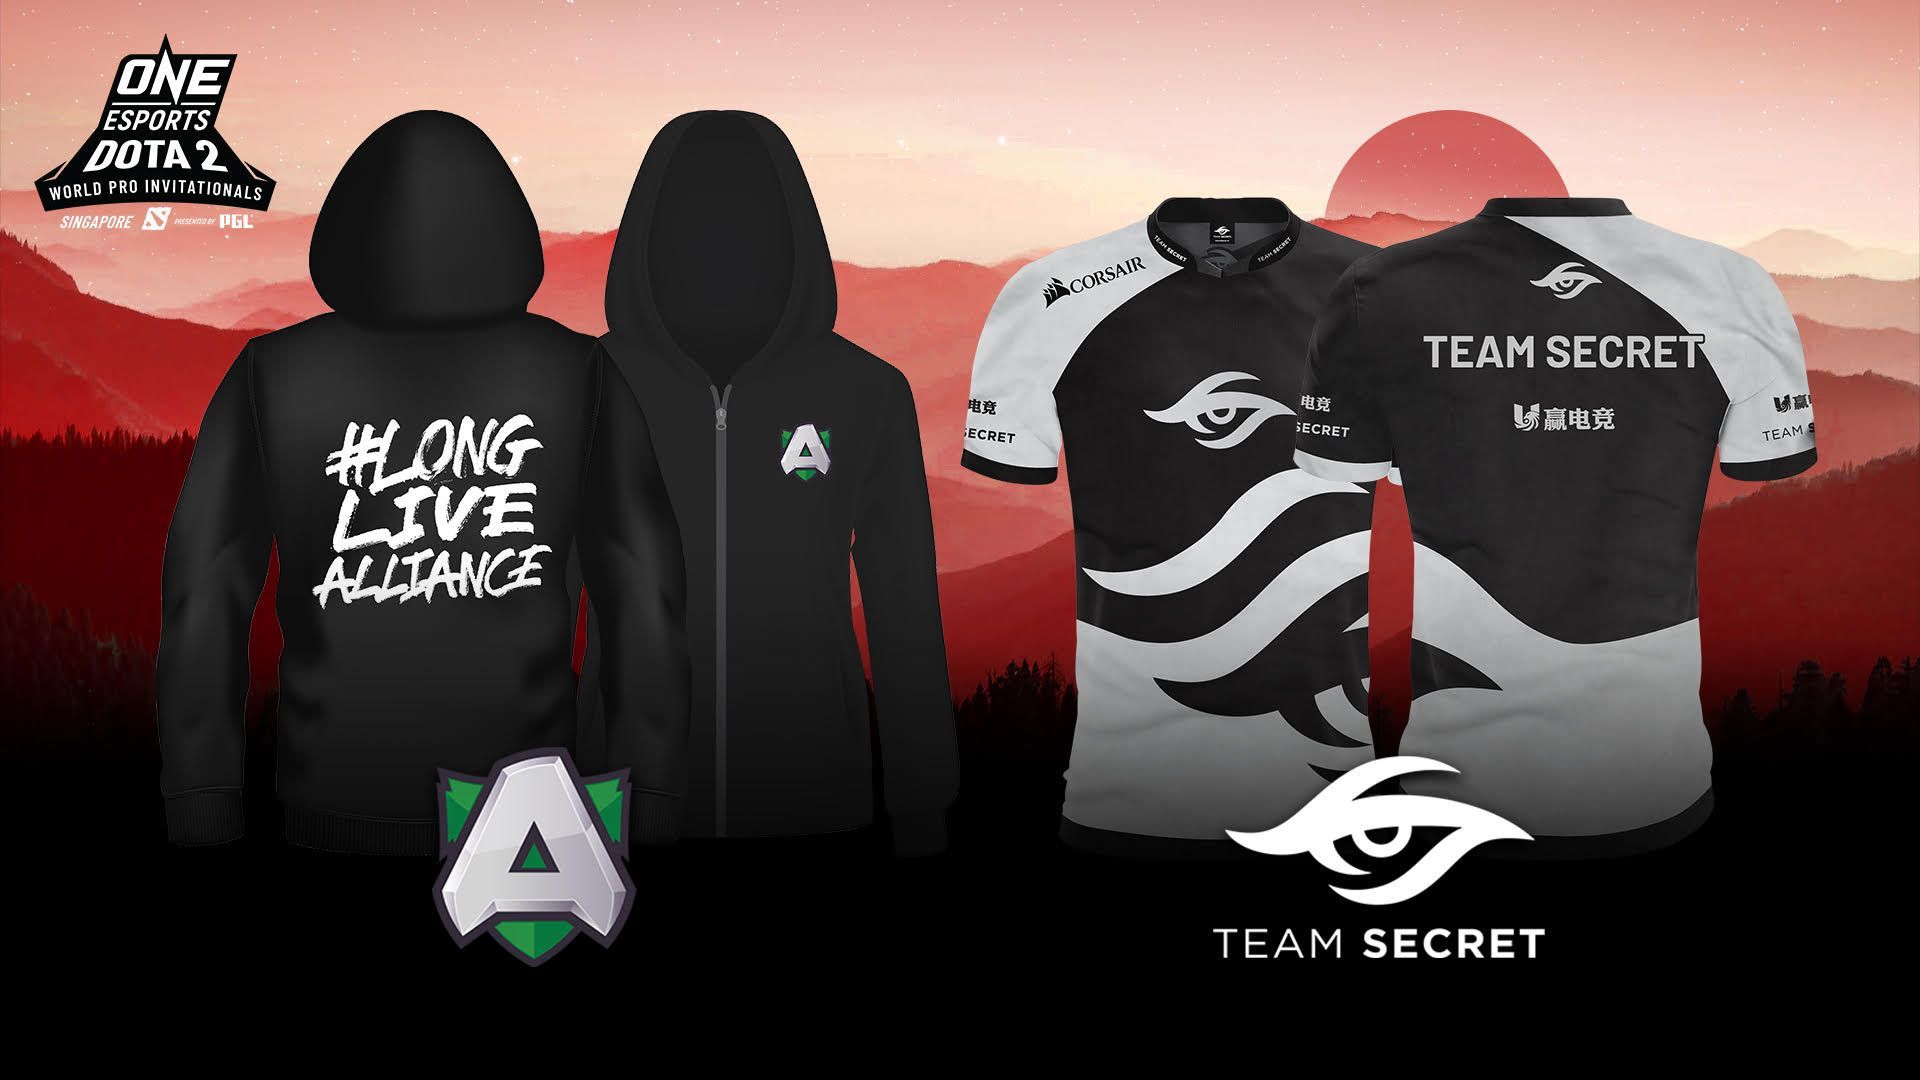 Get your official Team Secret and Alliance merch at the ONE Esports Dota 2 Singapore World Pro Invitational ONE Esports